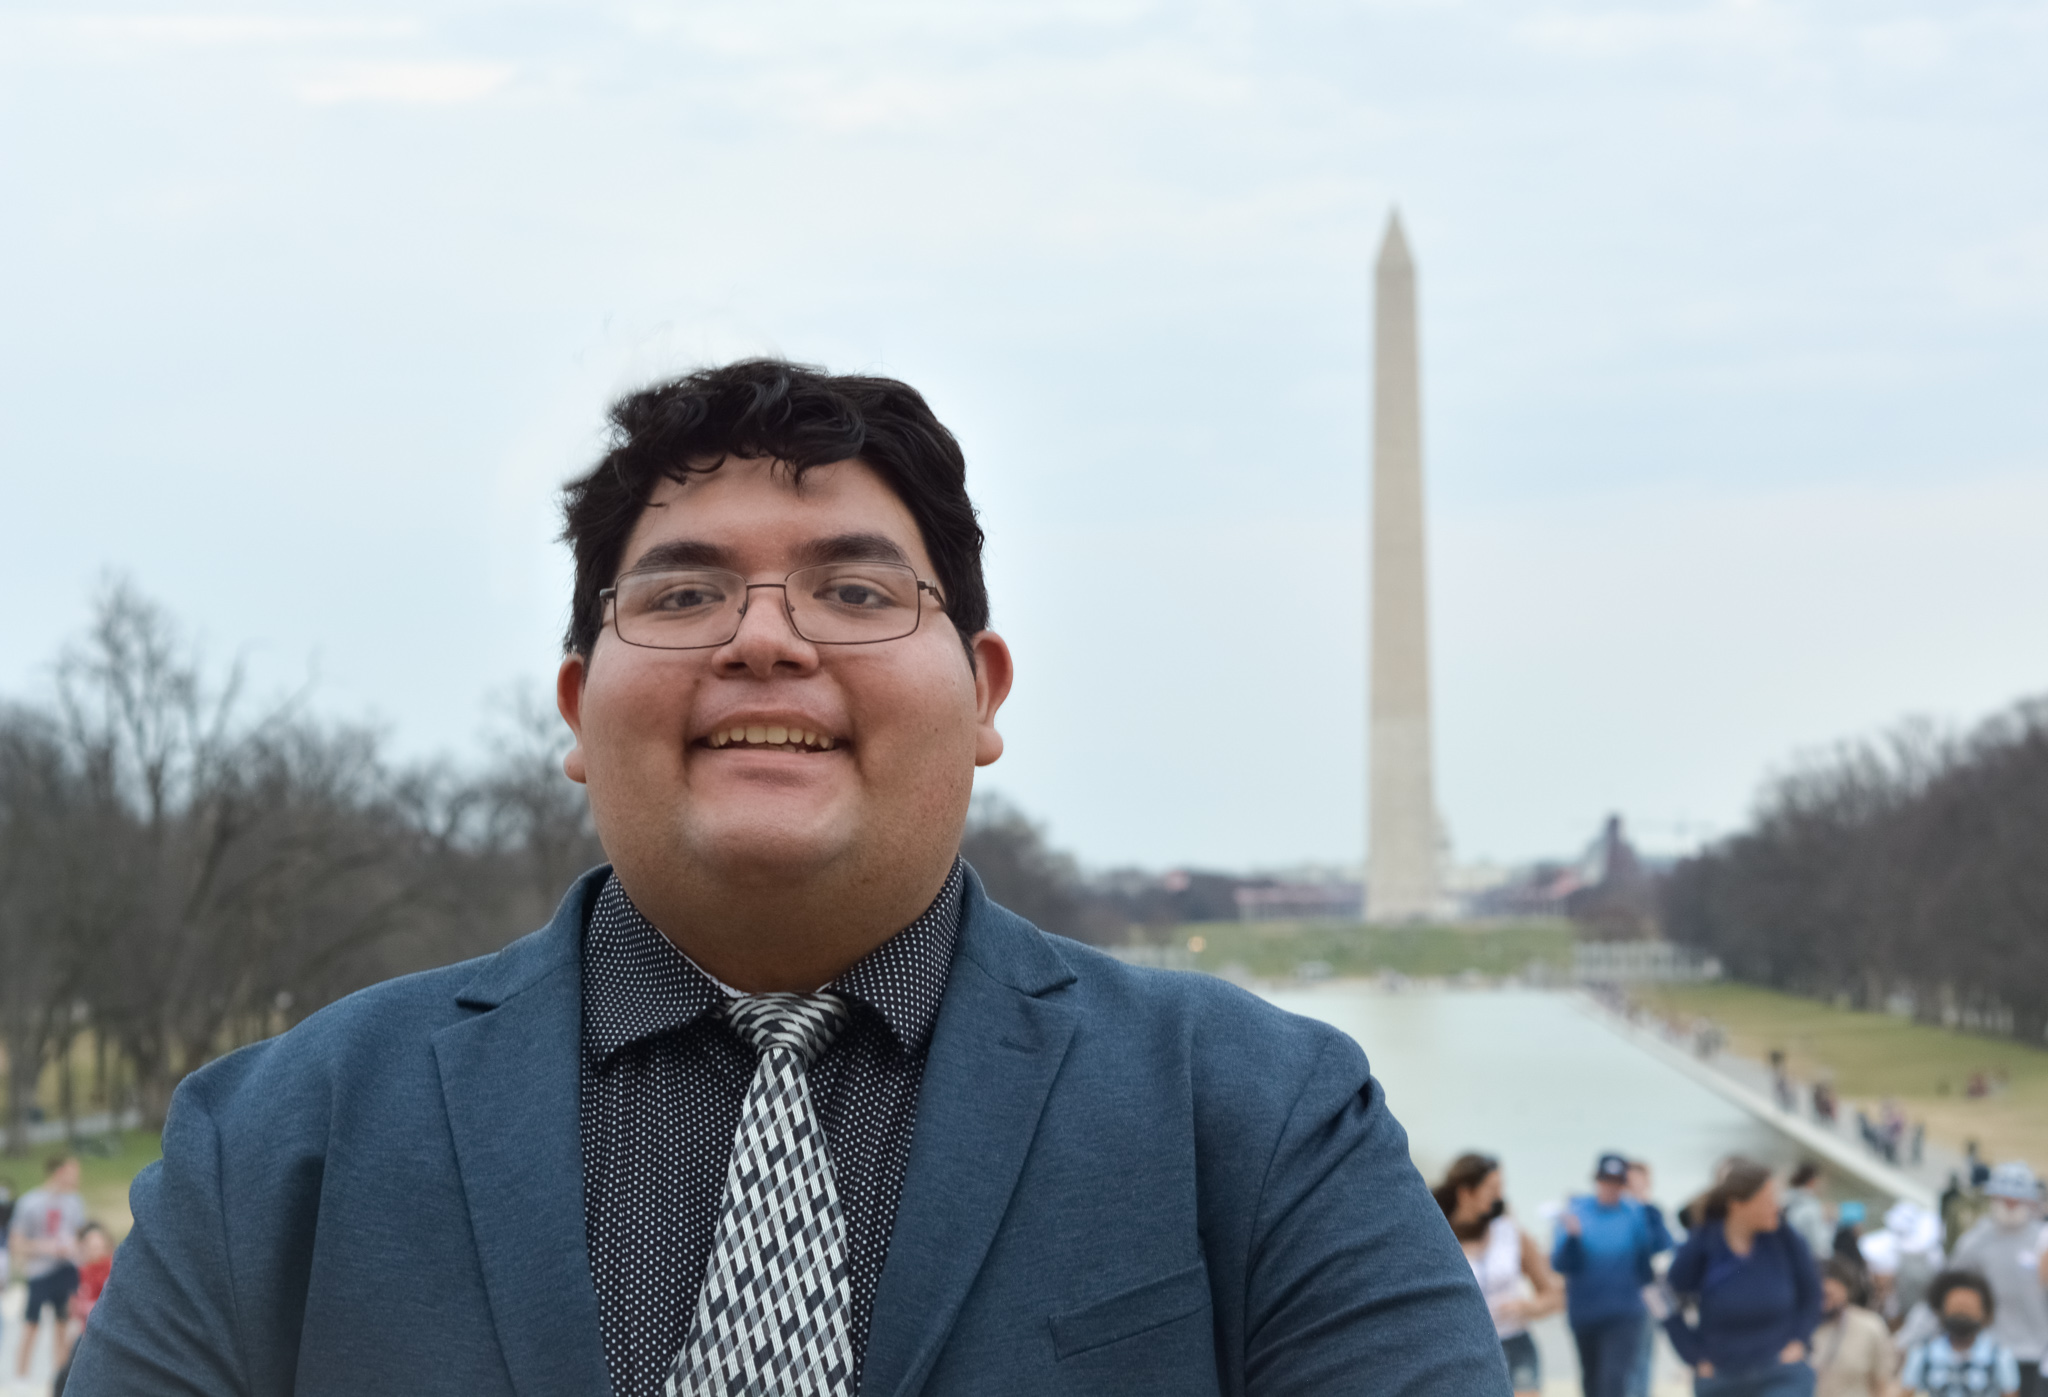 David Mesta, a tall light-skinned brown man with short curly hair and glasses, is smiling in front of the Washington Monument. He is wearing a medium grey suit and a white and grey patterned tie.